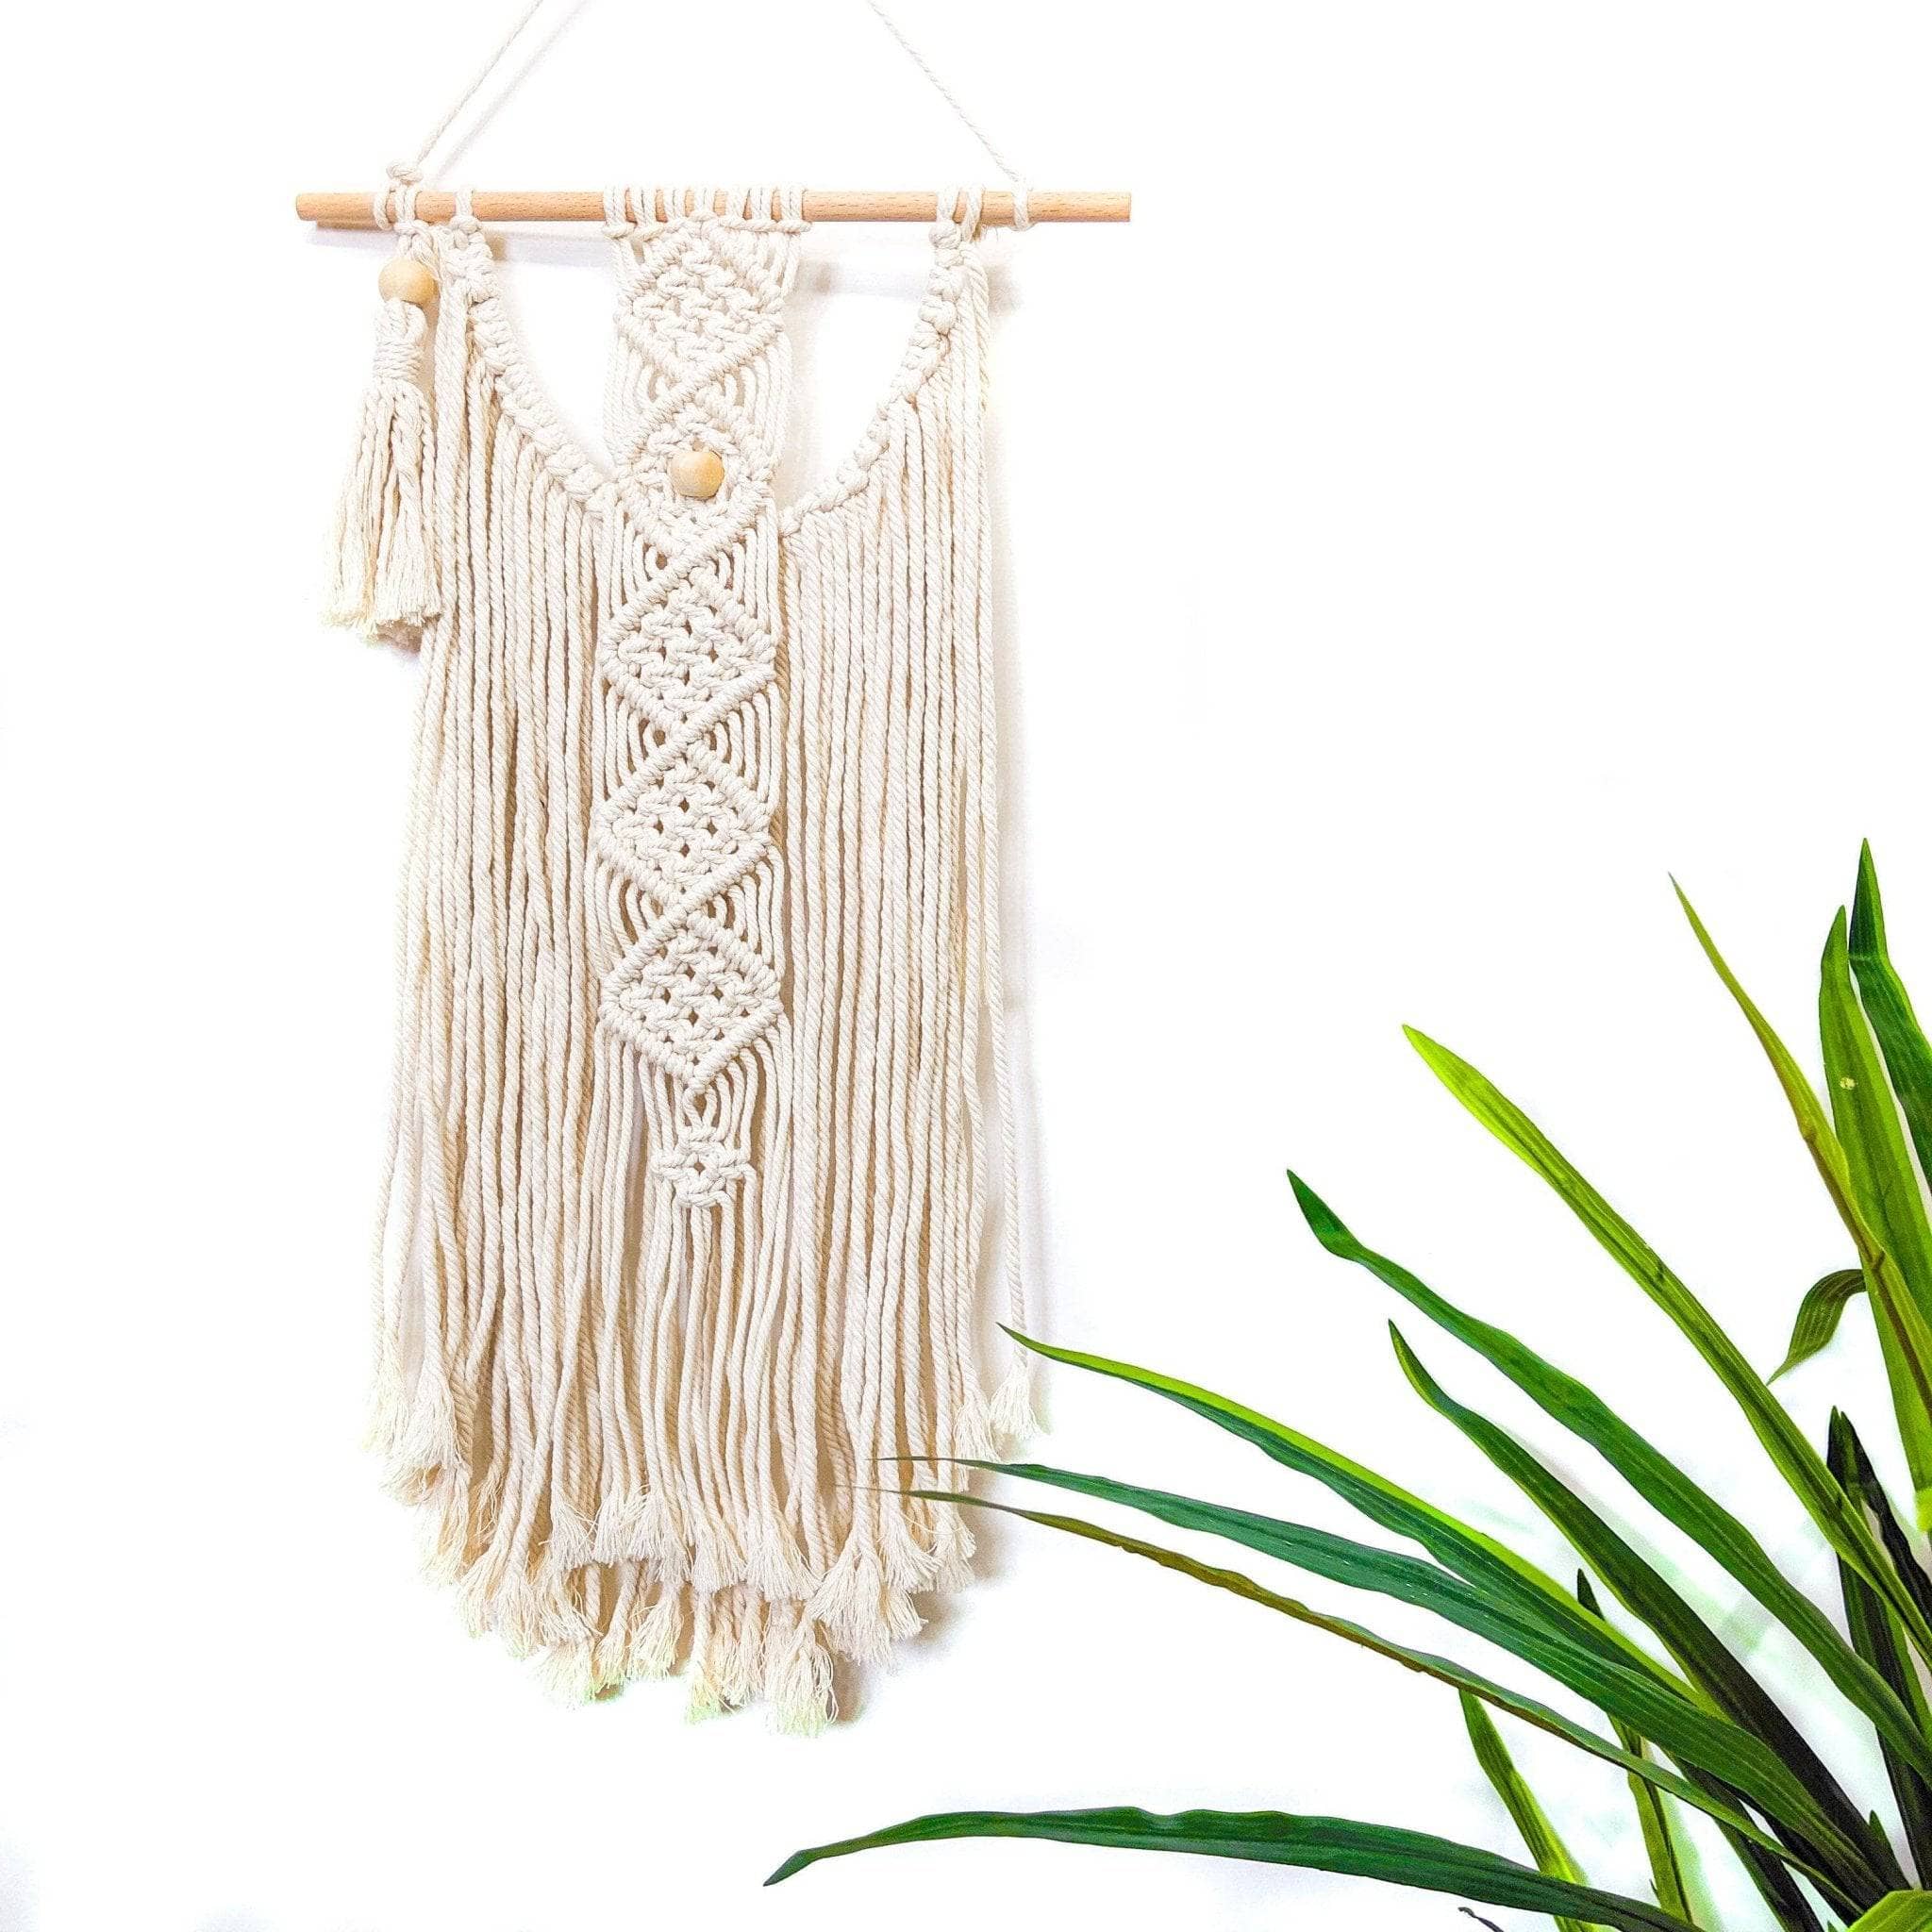 Are you interested in our Macrame wall hanging? With our wall hanging you  need look no further.